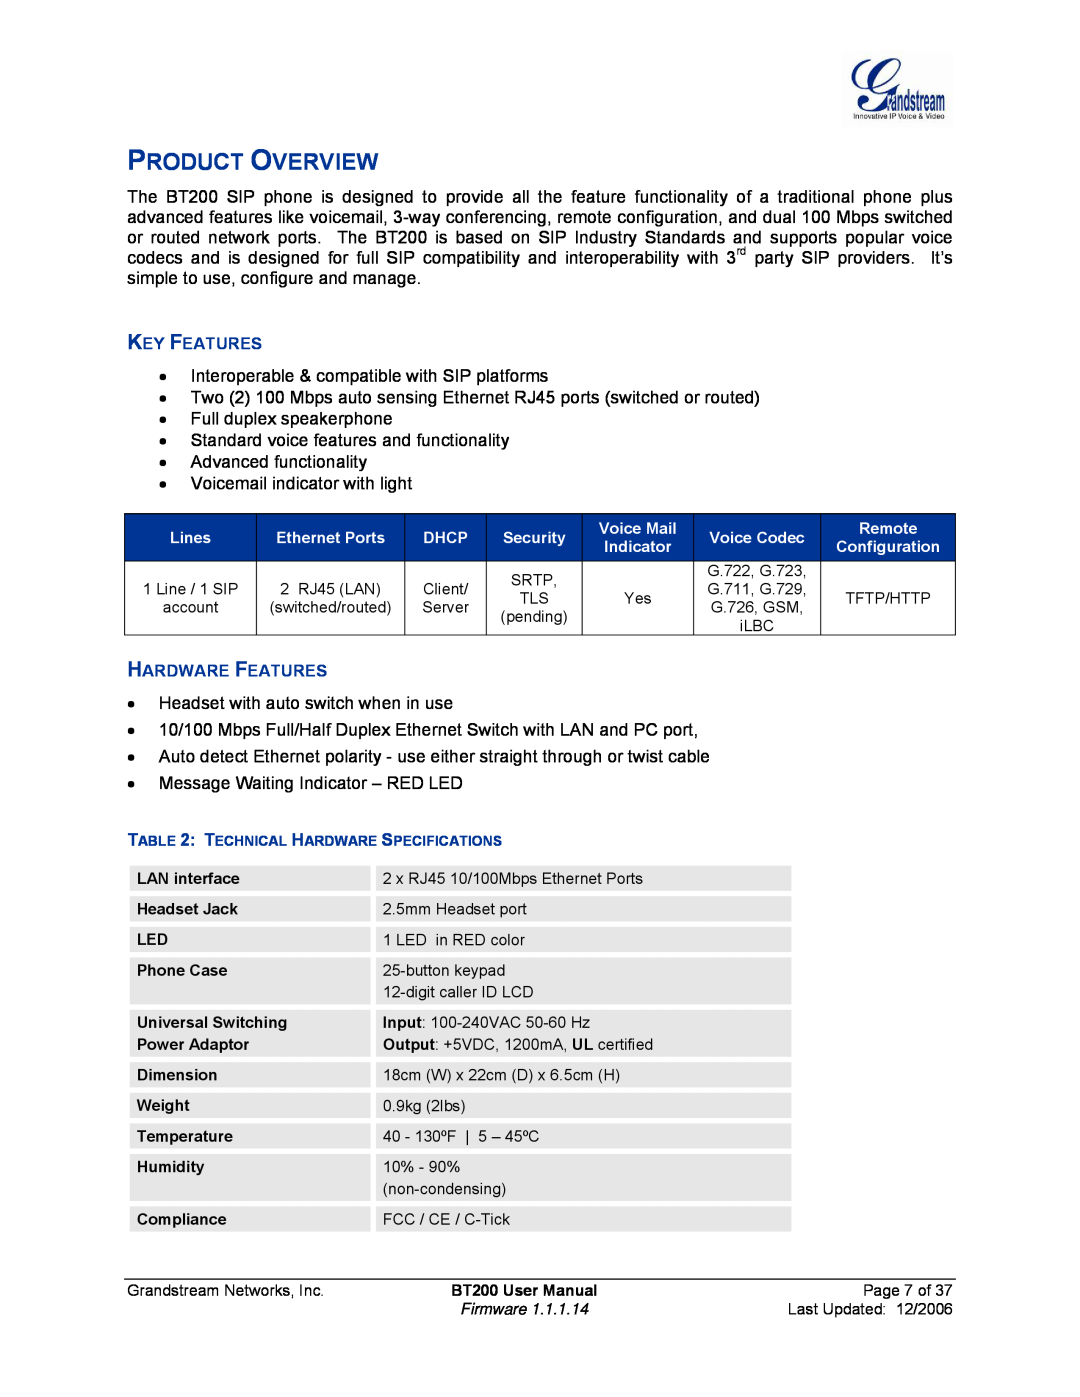 Grandstream Networks BT200 user manual Product Overview, Key Features, Hardware Features 